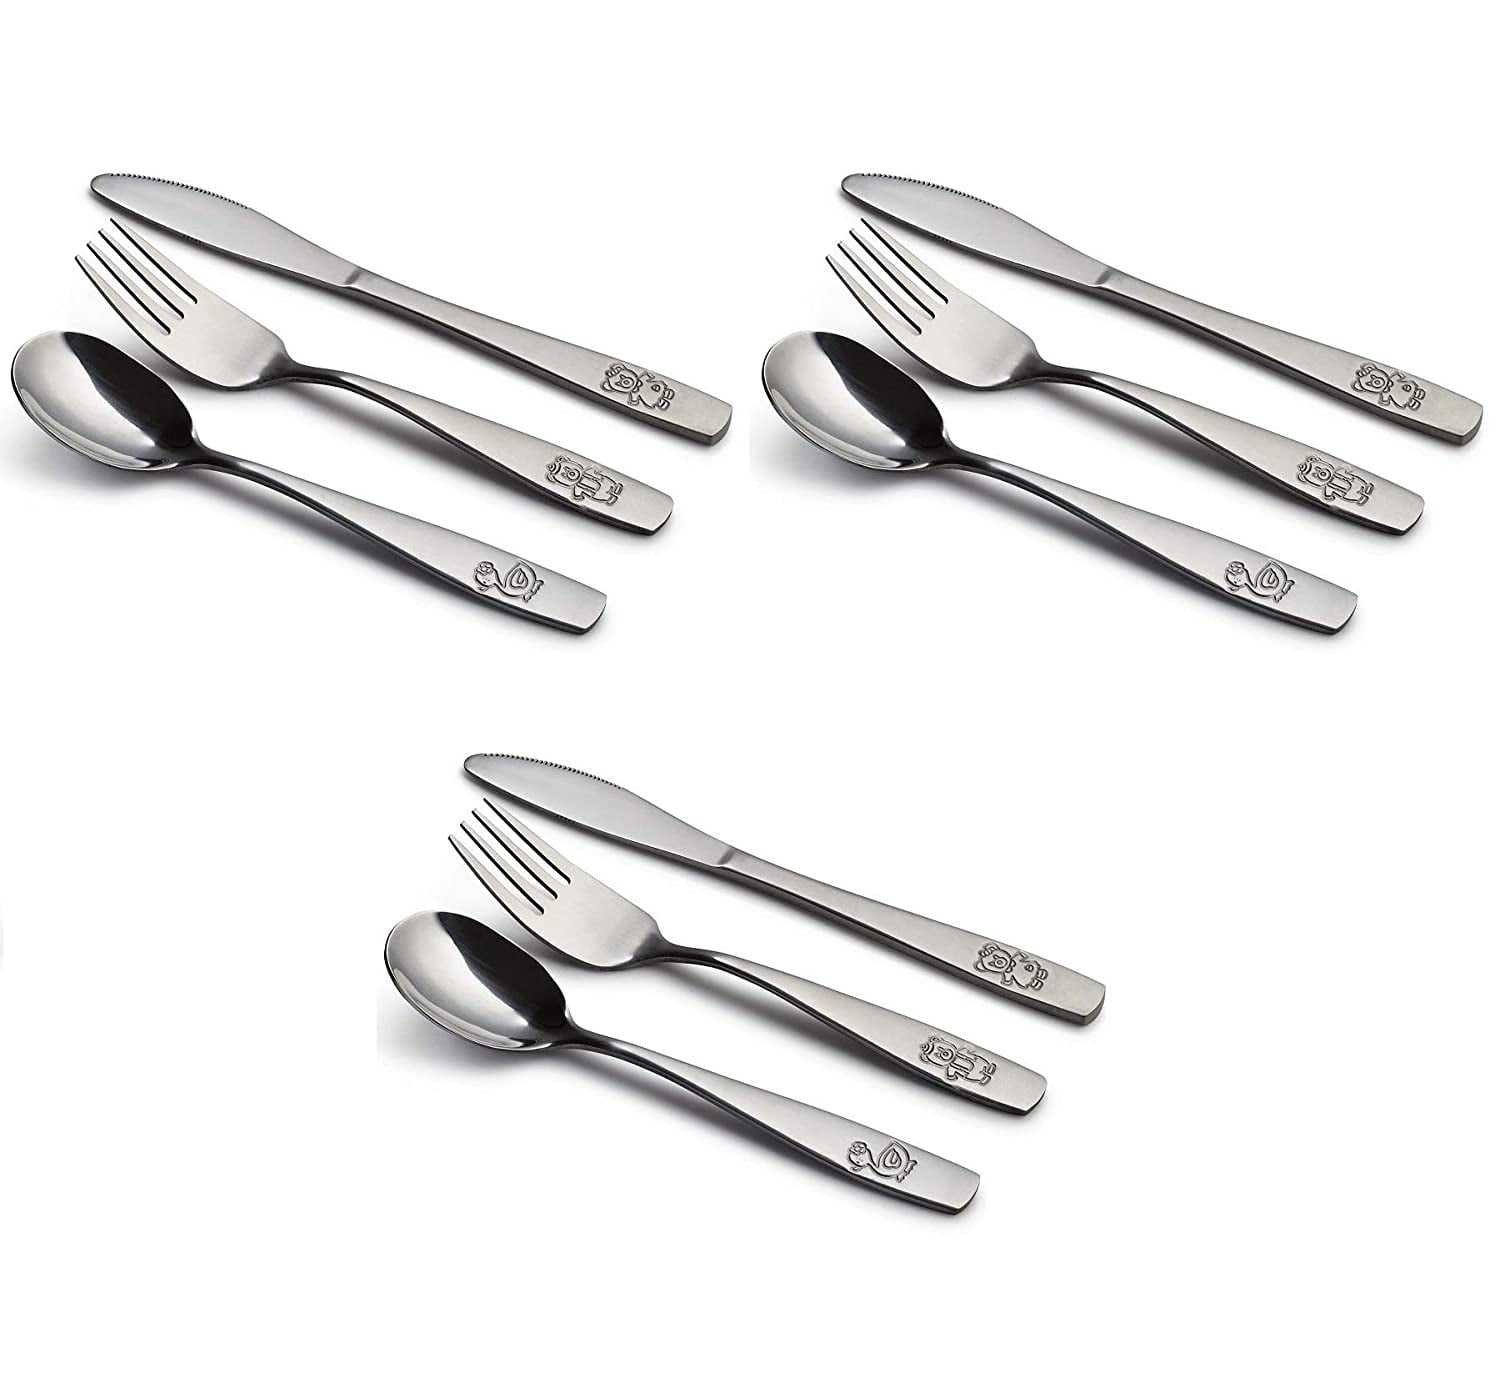 8 x Child Forks 16 Pieces Toddler Silverware Stainless Steel Kids Utensils Children's Safe Flatware Toddler Forks and Spoons Metal Cutlery Set for Lunch Box 8 x Children Spoons Engraved Bear 